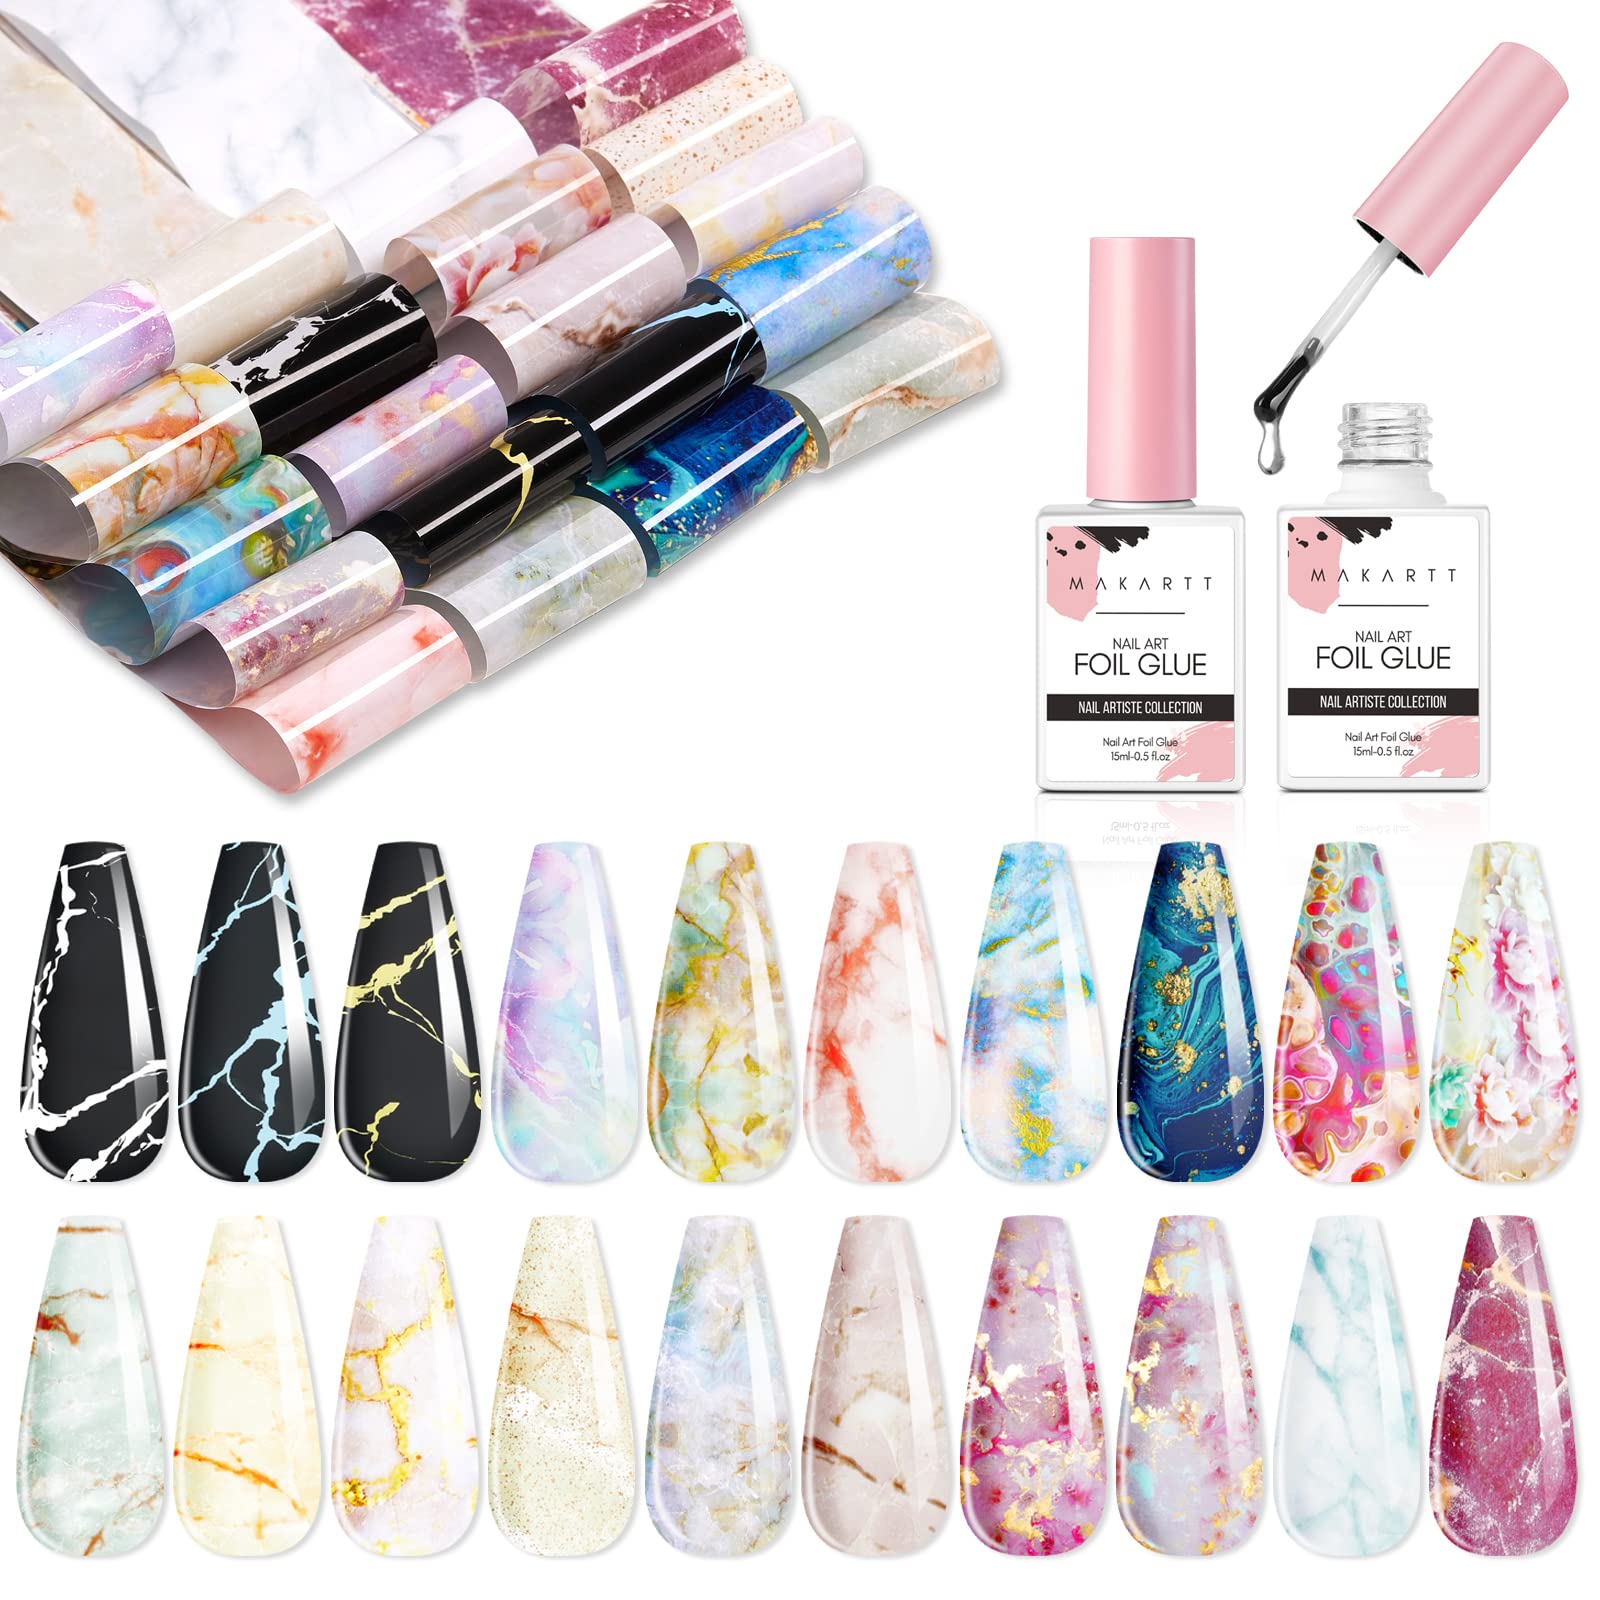 MSHARE Nail Transfer Foil Glue Gel Polish Nails Adhensive Transfering with  Free foil Sticker - AliExpress